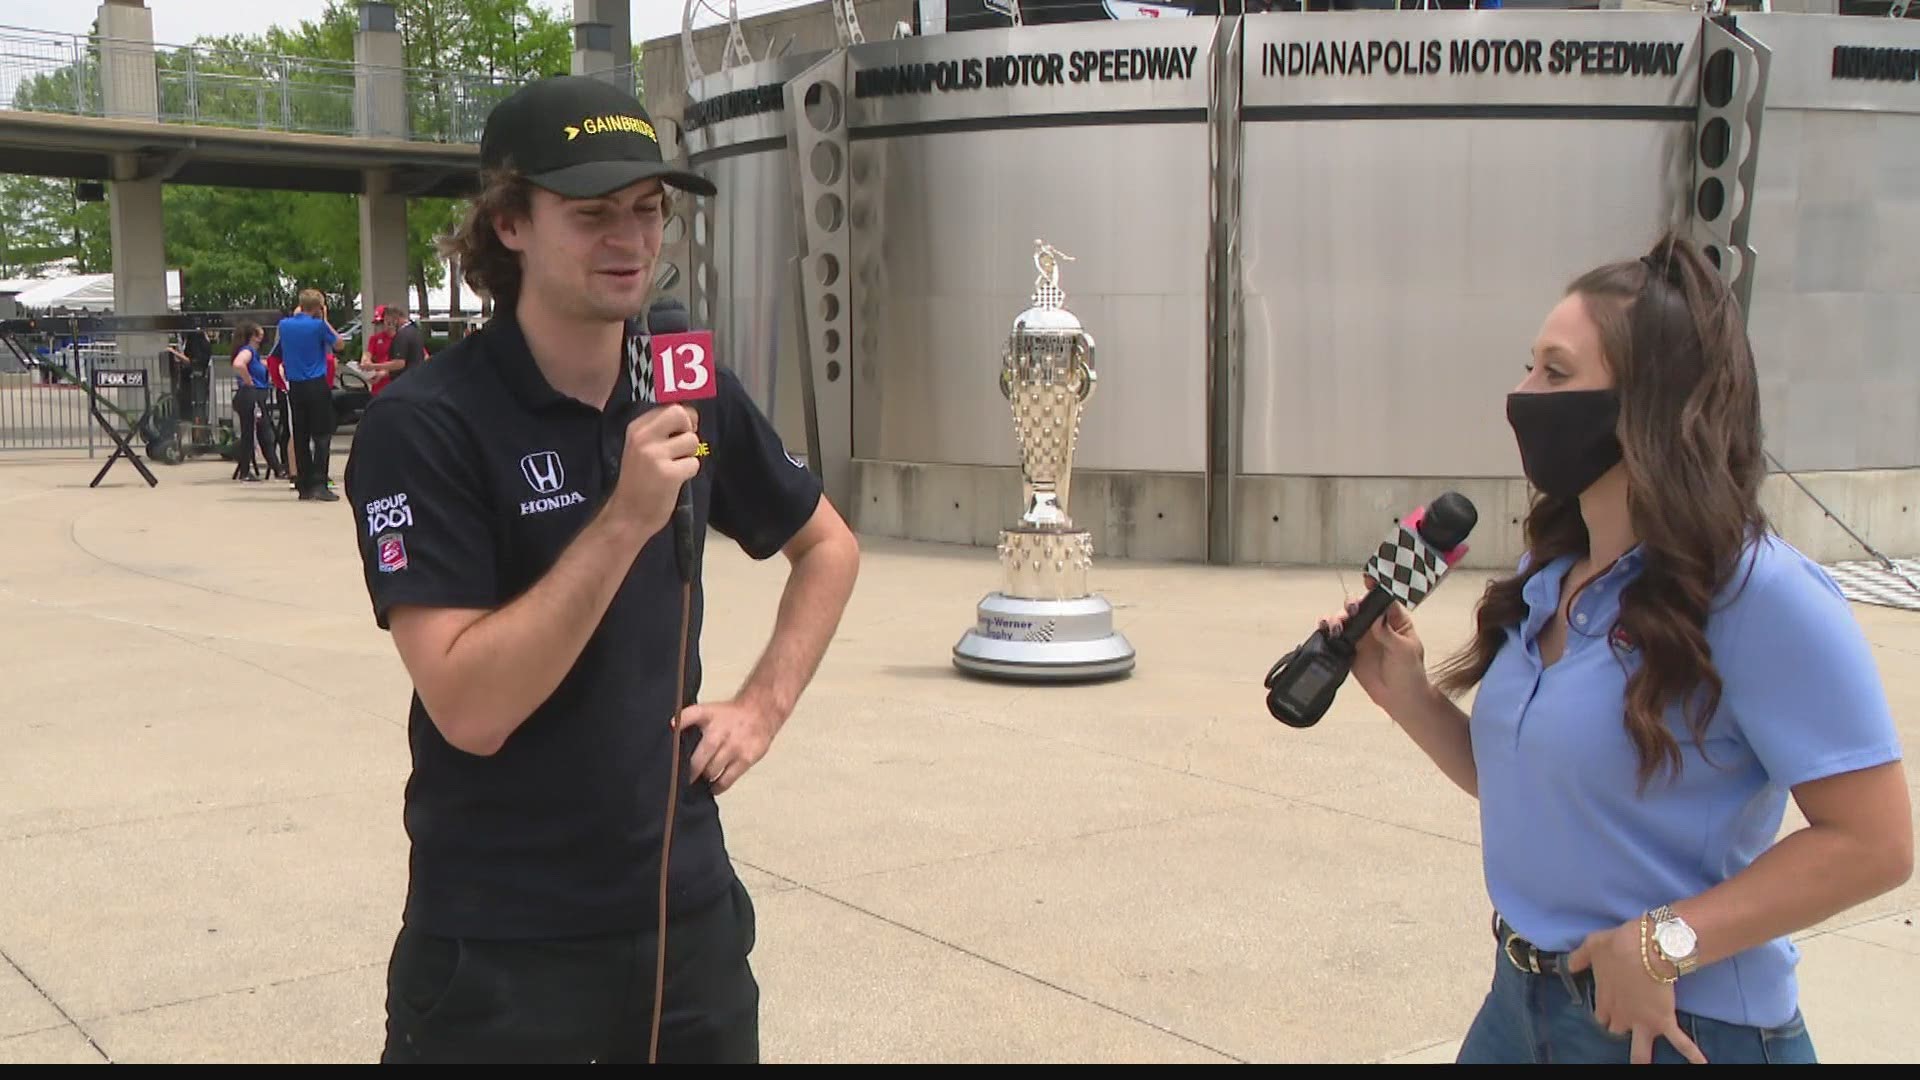 Taylor Tannebaum talks with IndyCar driver Colton Herta about his chances in today's Indy 500.